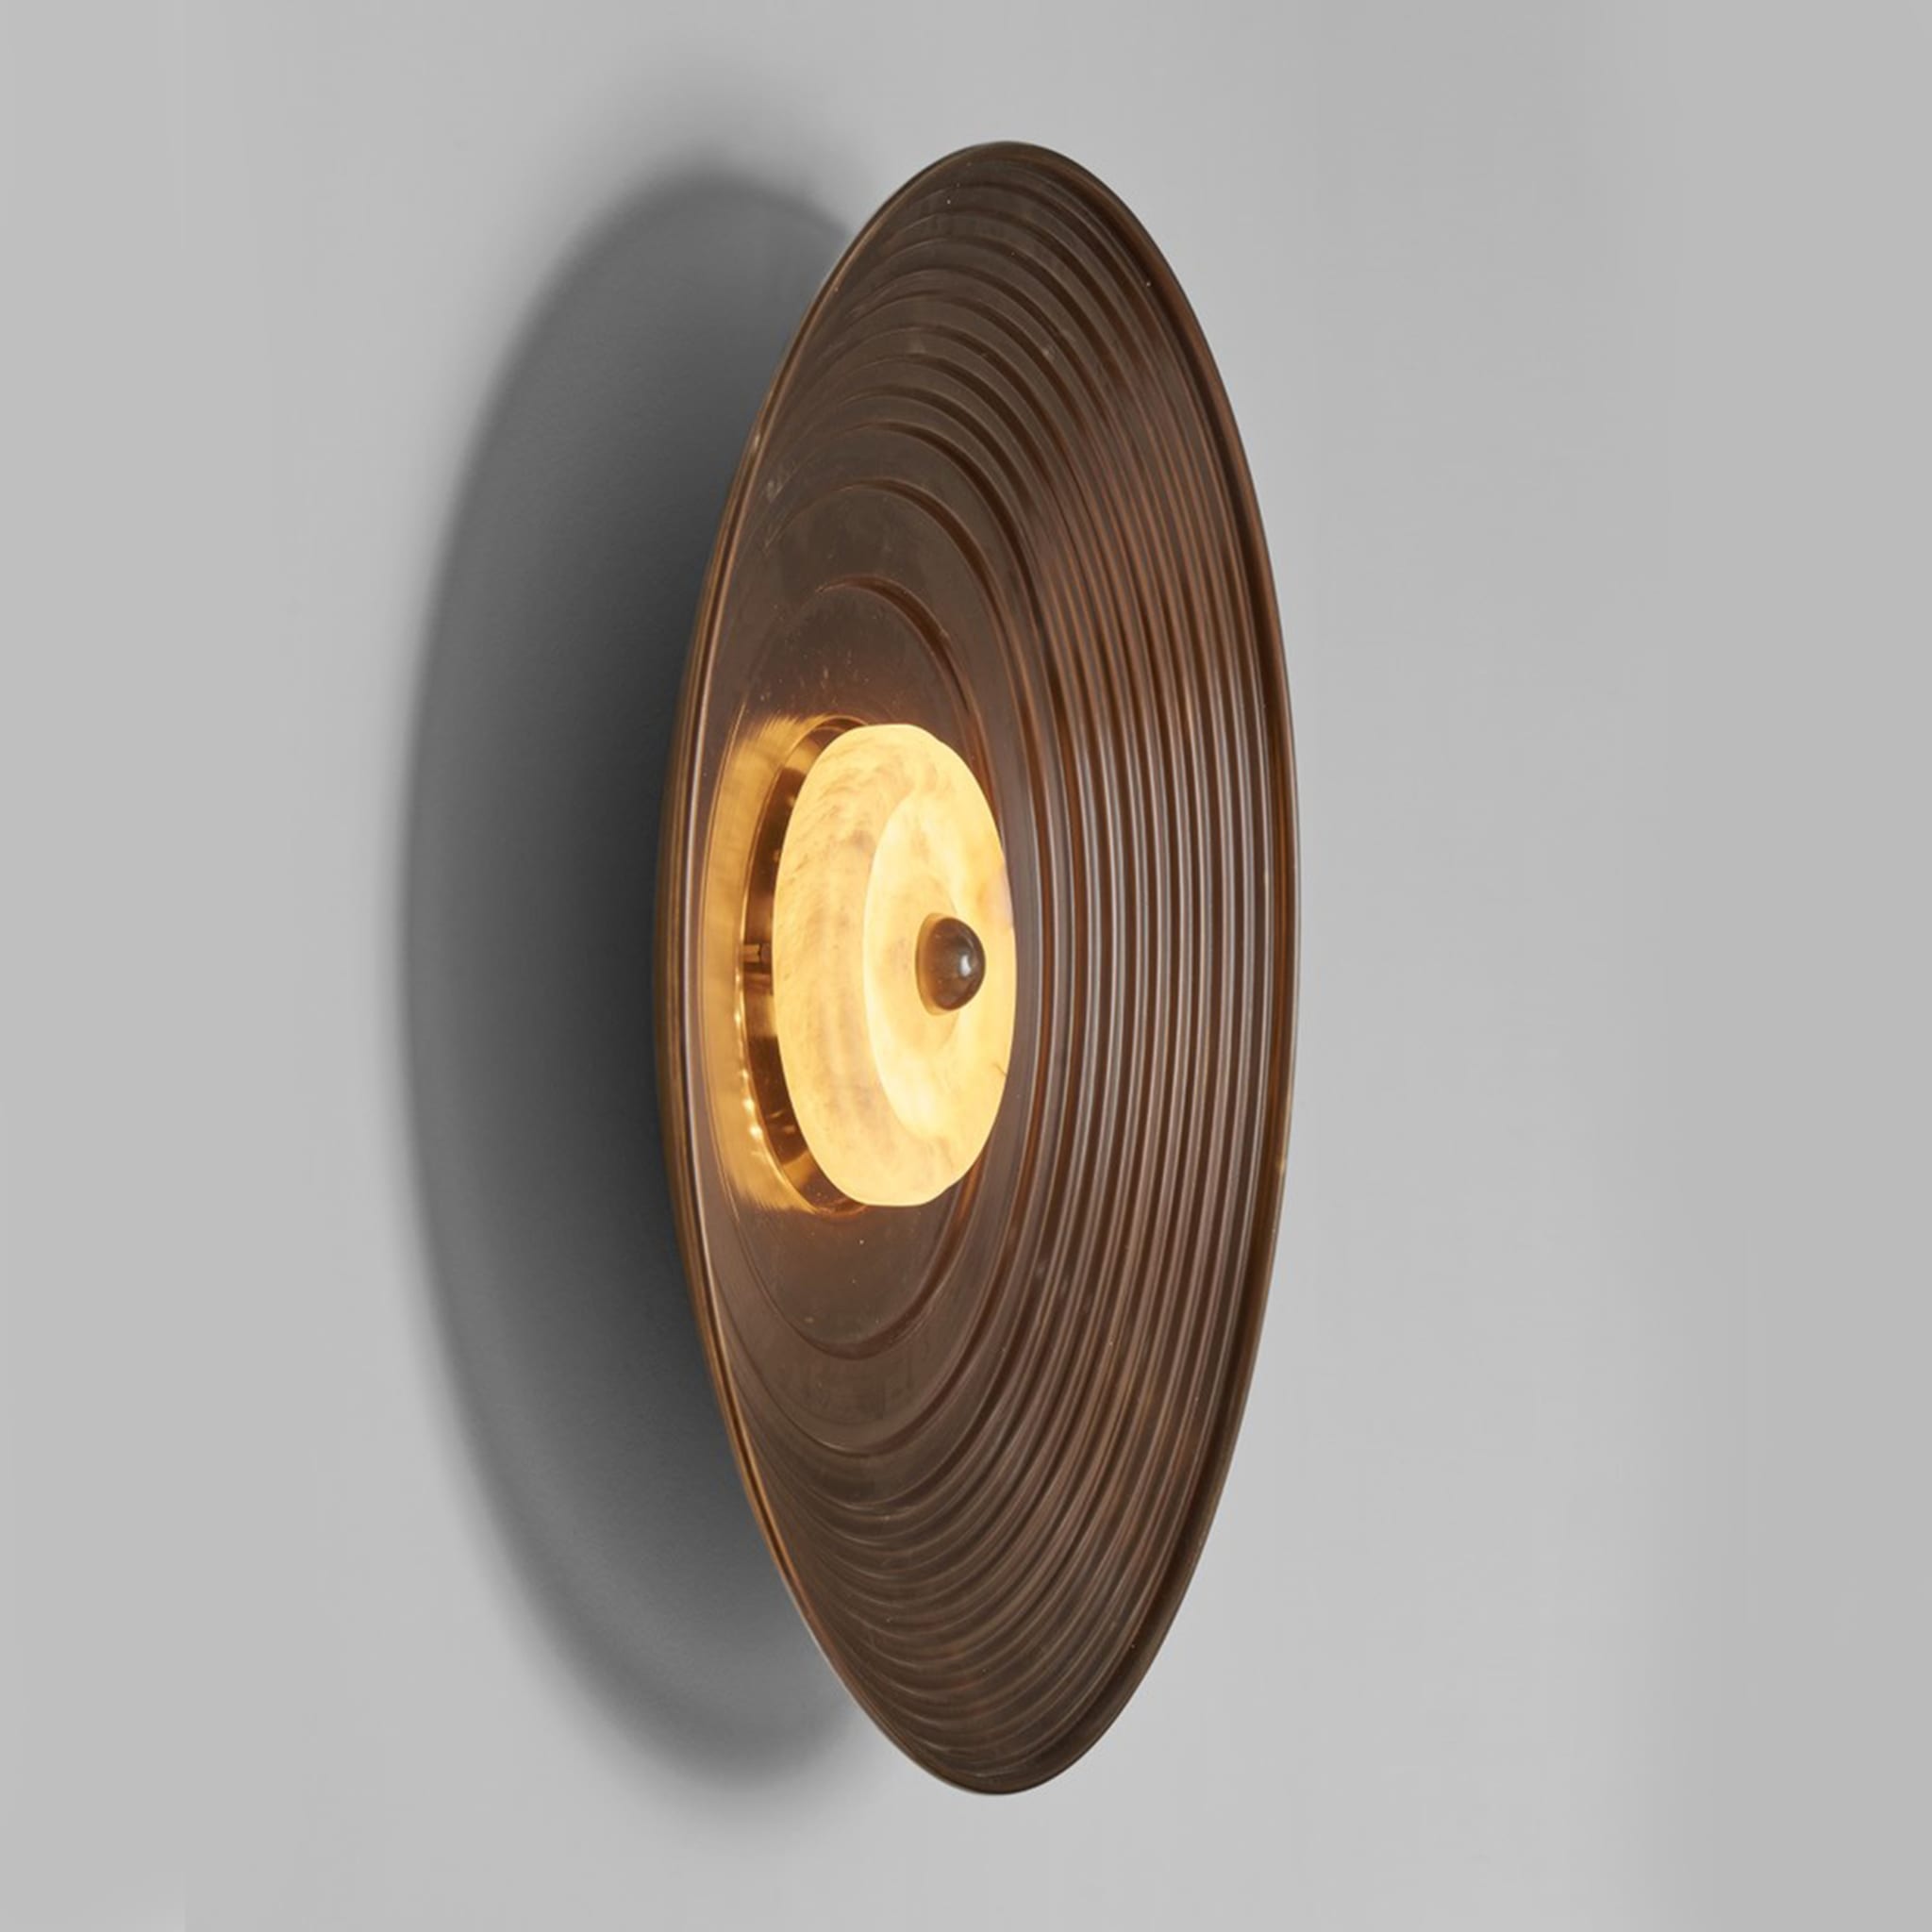 Sculptural Wall Sconce "Gong" By LC Atelier - Alternative view 2